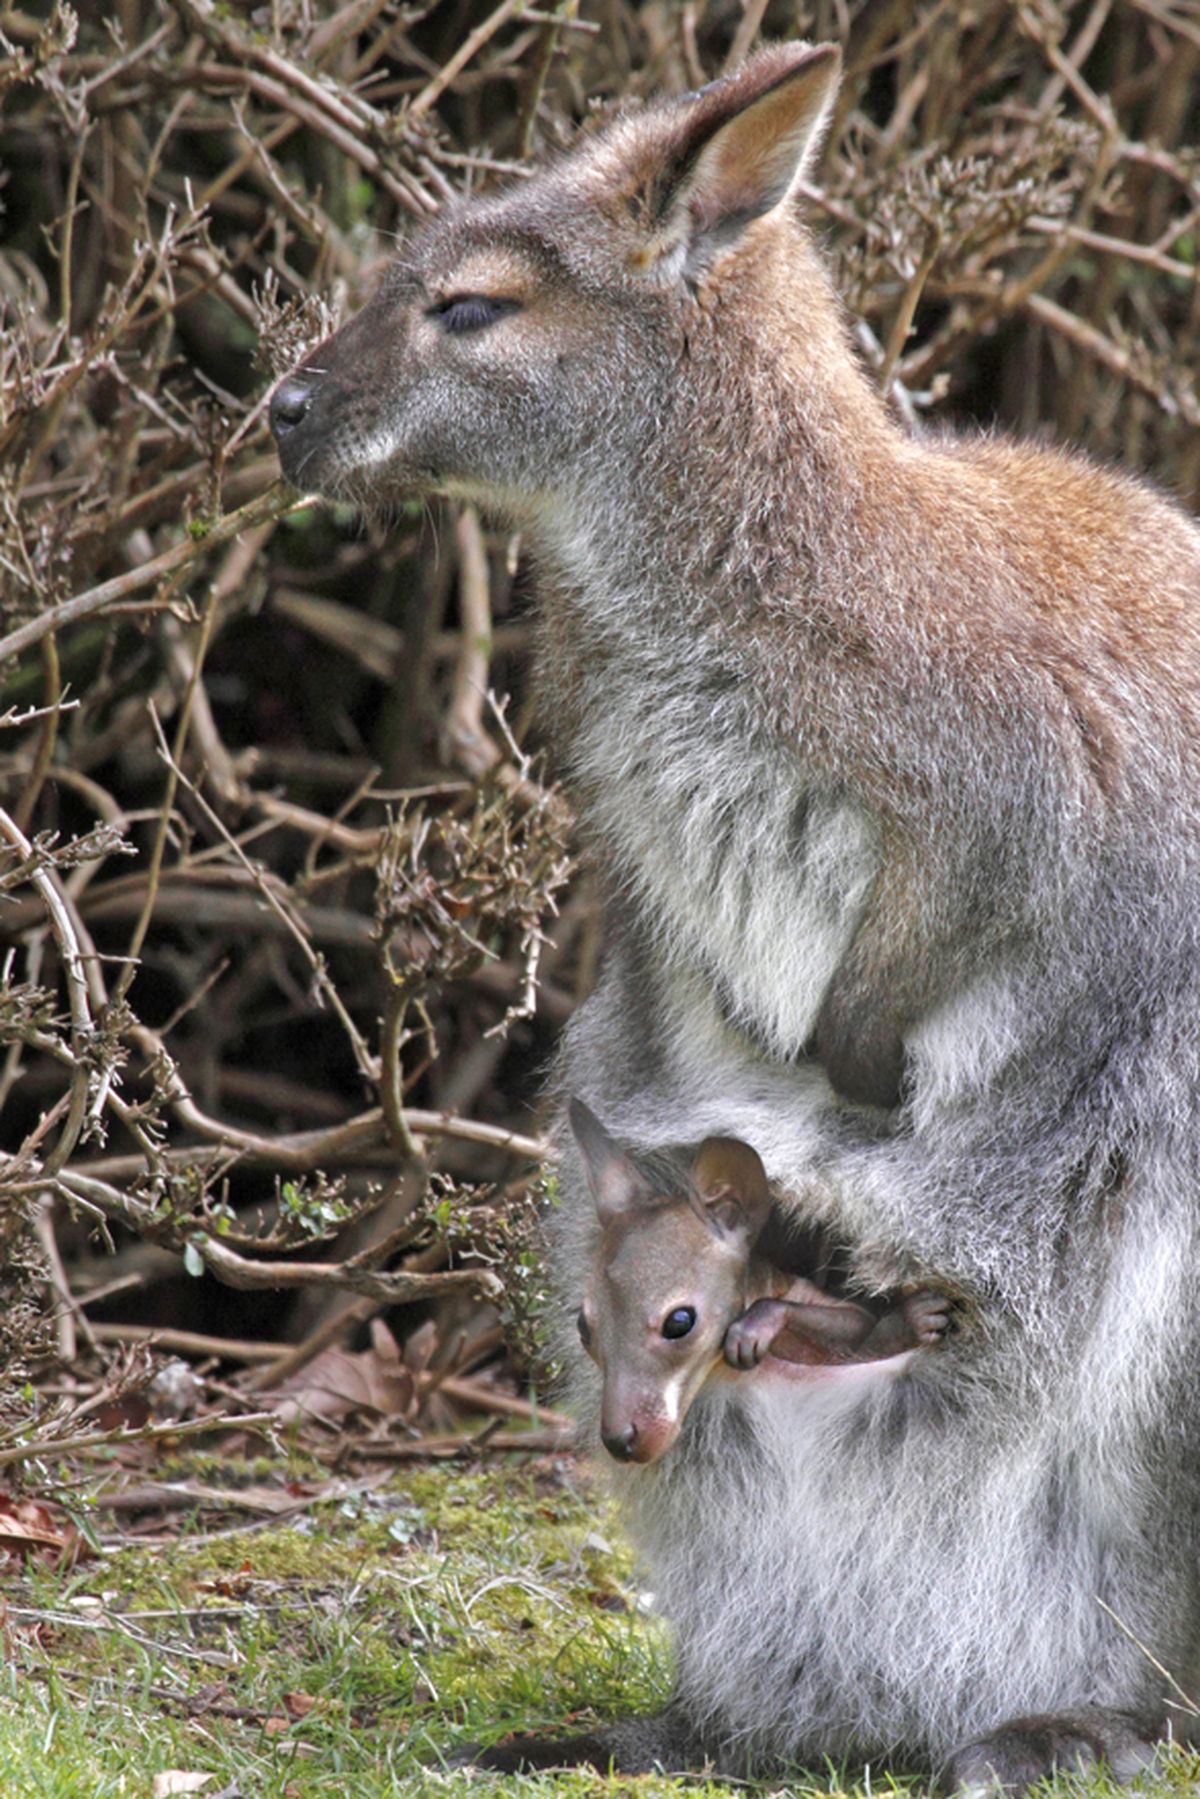 In a Wednesday, March 28, 2012 photo provided by the Woodland Park Zoo, a 5-month-old wallaby joey at Woodland Park Zoo peeks out of its mother